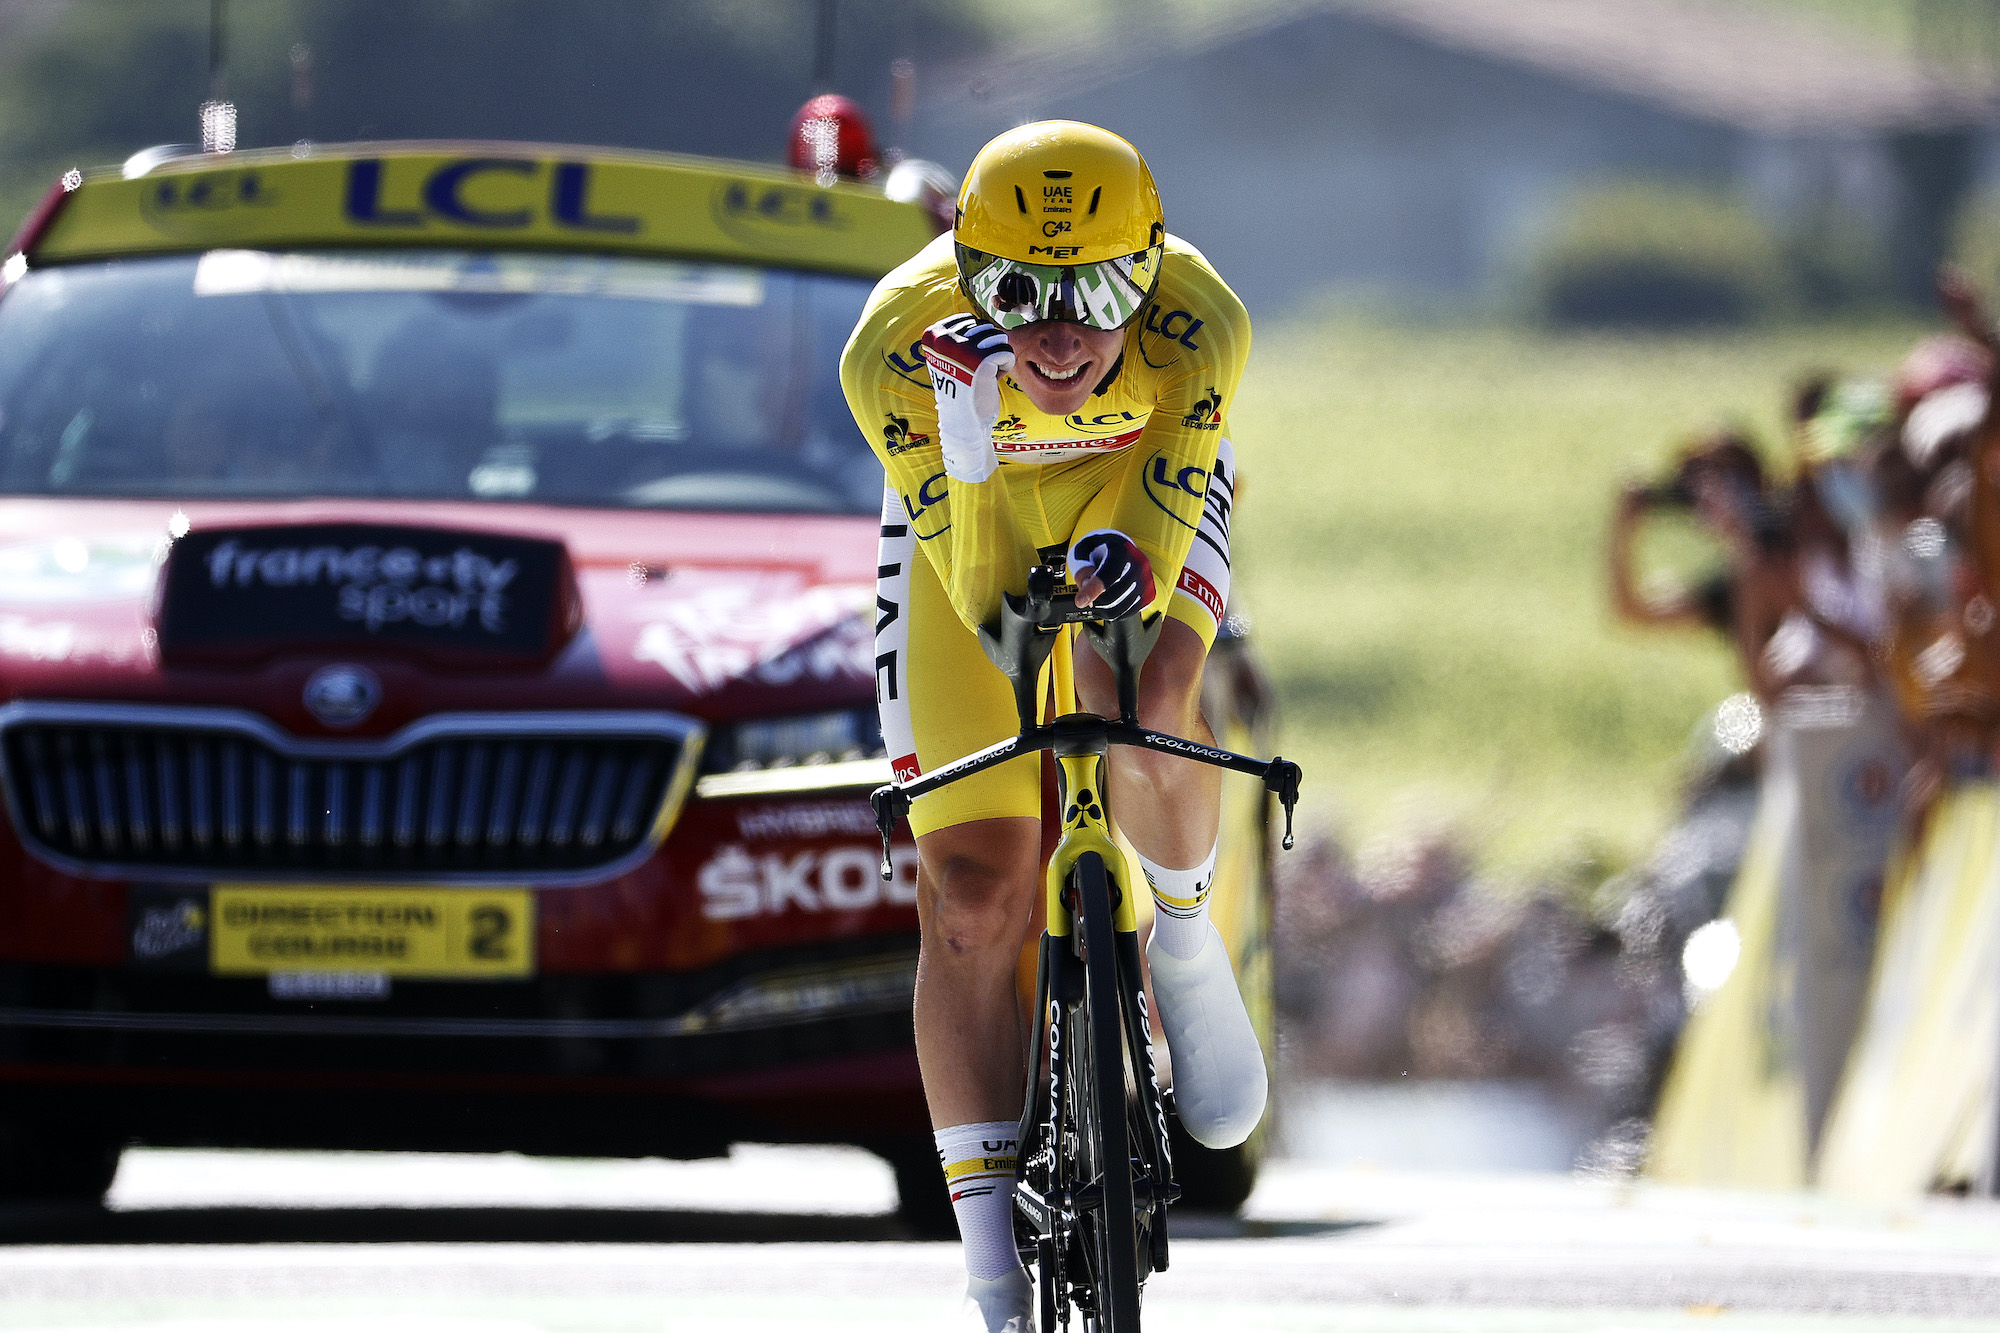 Tadej Pogacar set to win 2021 Tour de France as he holds yellow jersey in  penultimate stage - Mirror Online